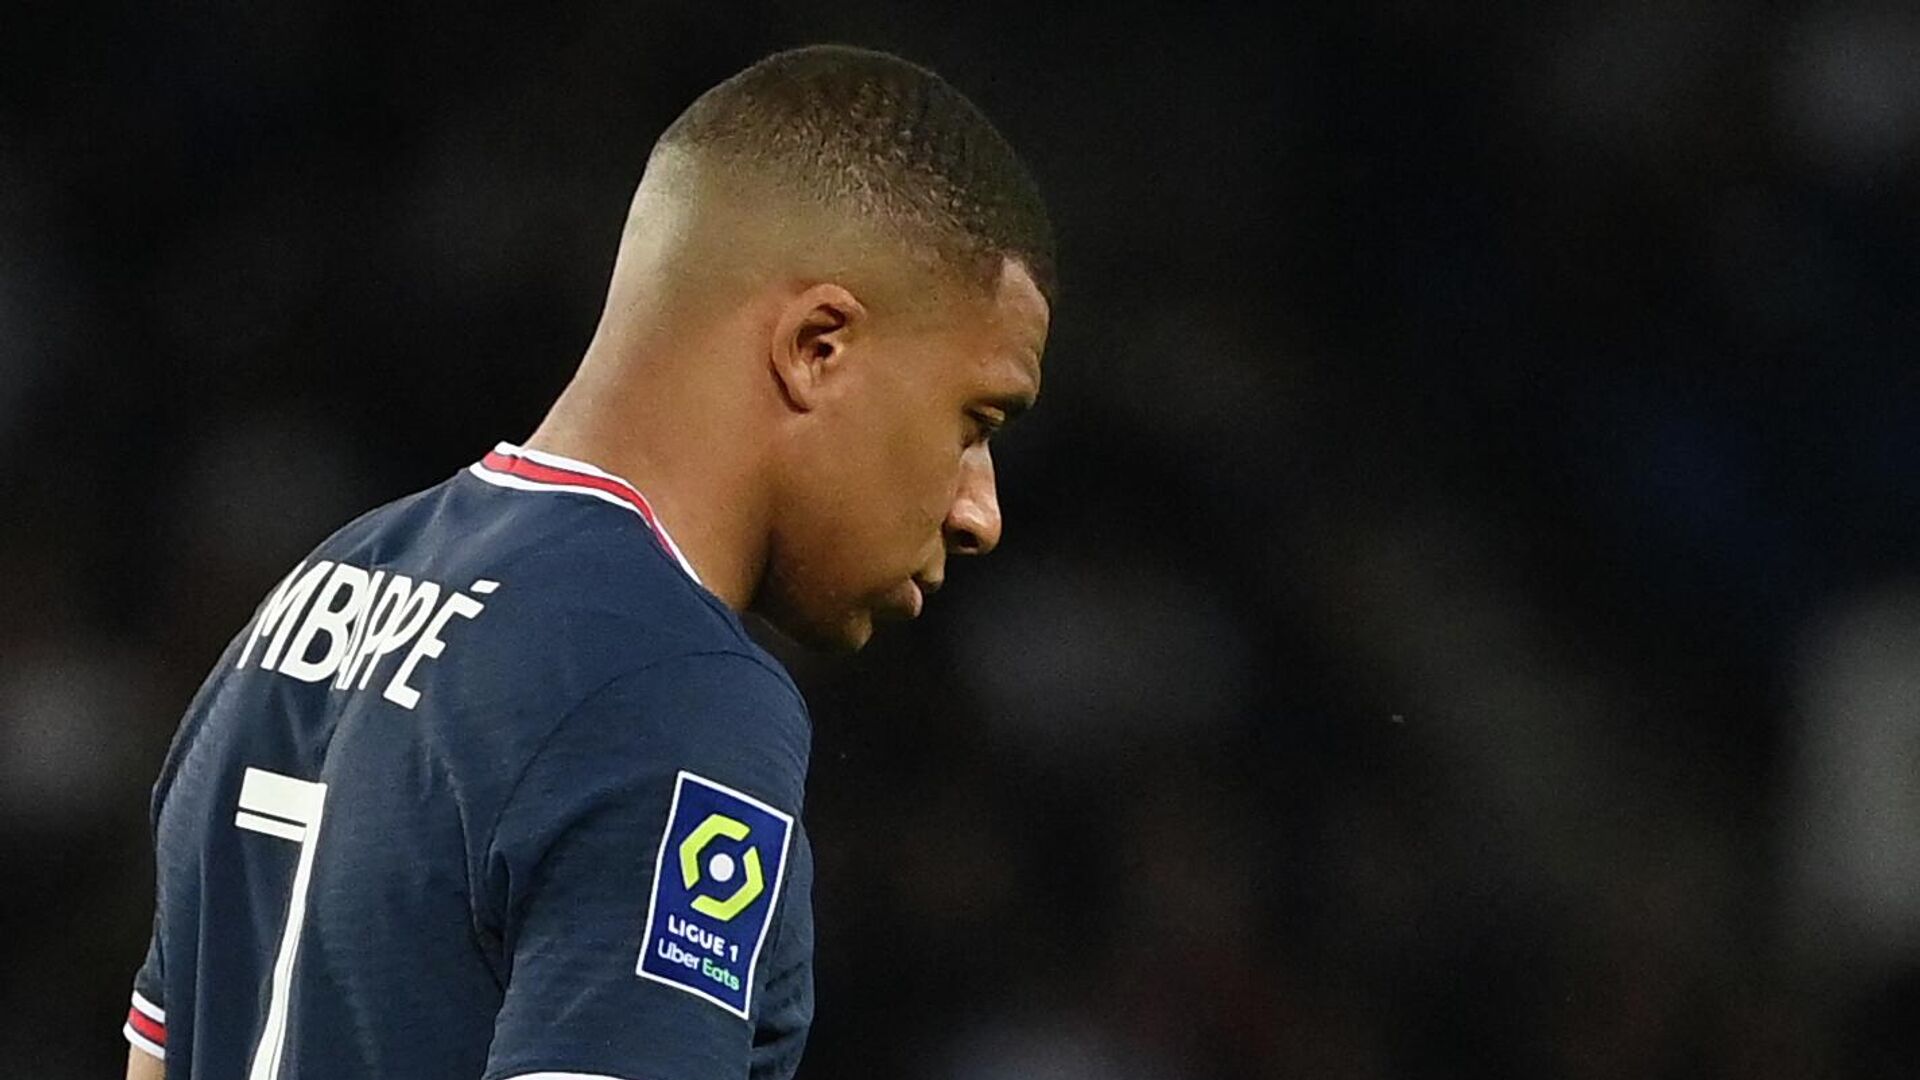 Paris Saint-Germain's French forward Kylian Mbappe reacts at the end of the French L1 football match between Paris-Saint Germain (PSG) and ES Troyes AC at The Parc des Princes Stadium in Paris on May 8, 2022 - Sputnik International, 1920, 21.05.2022